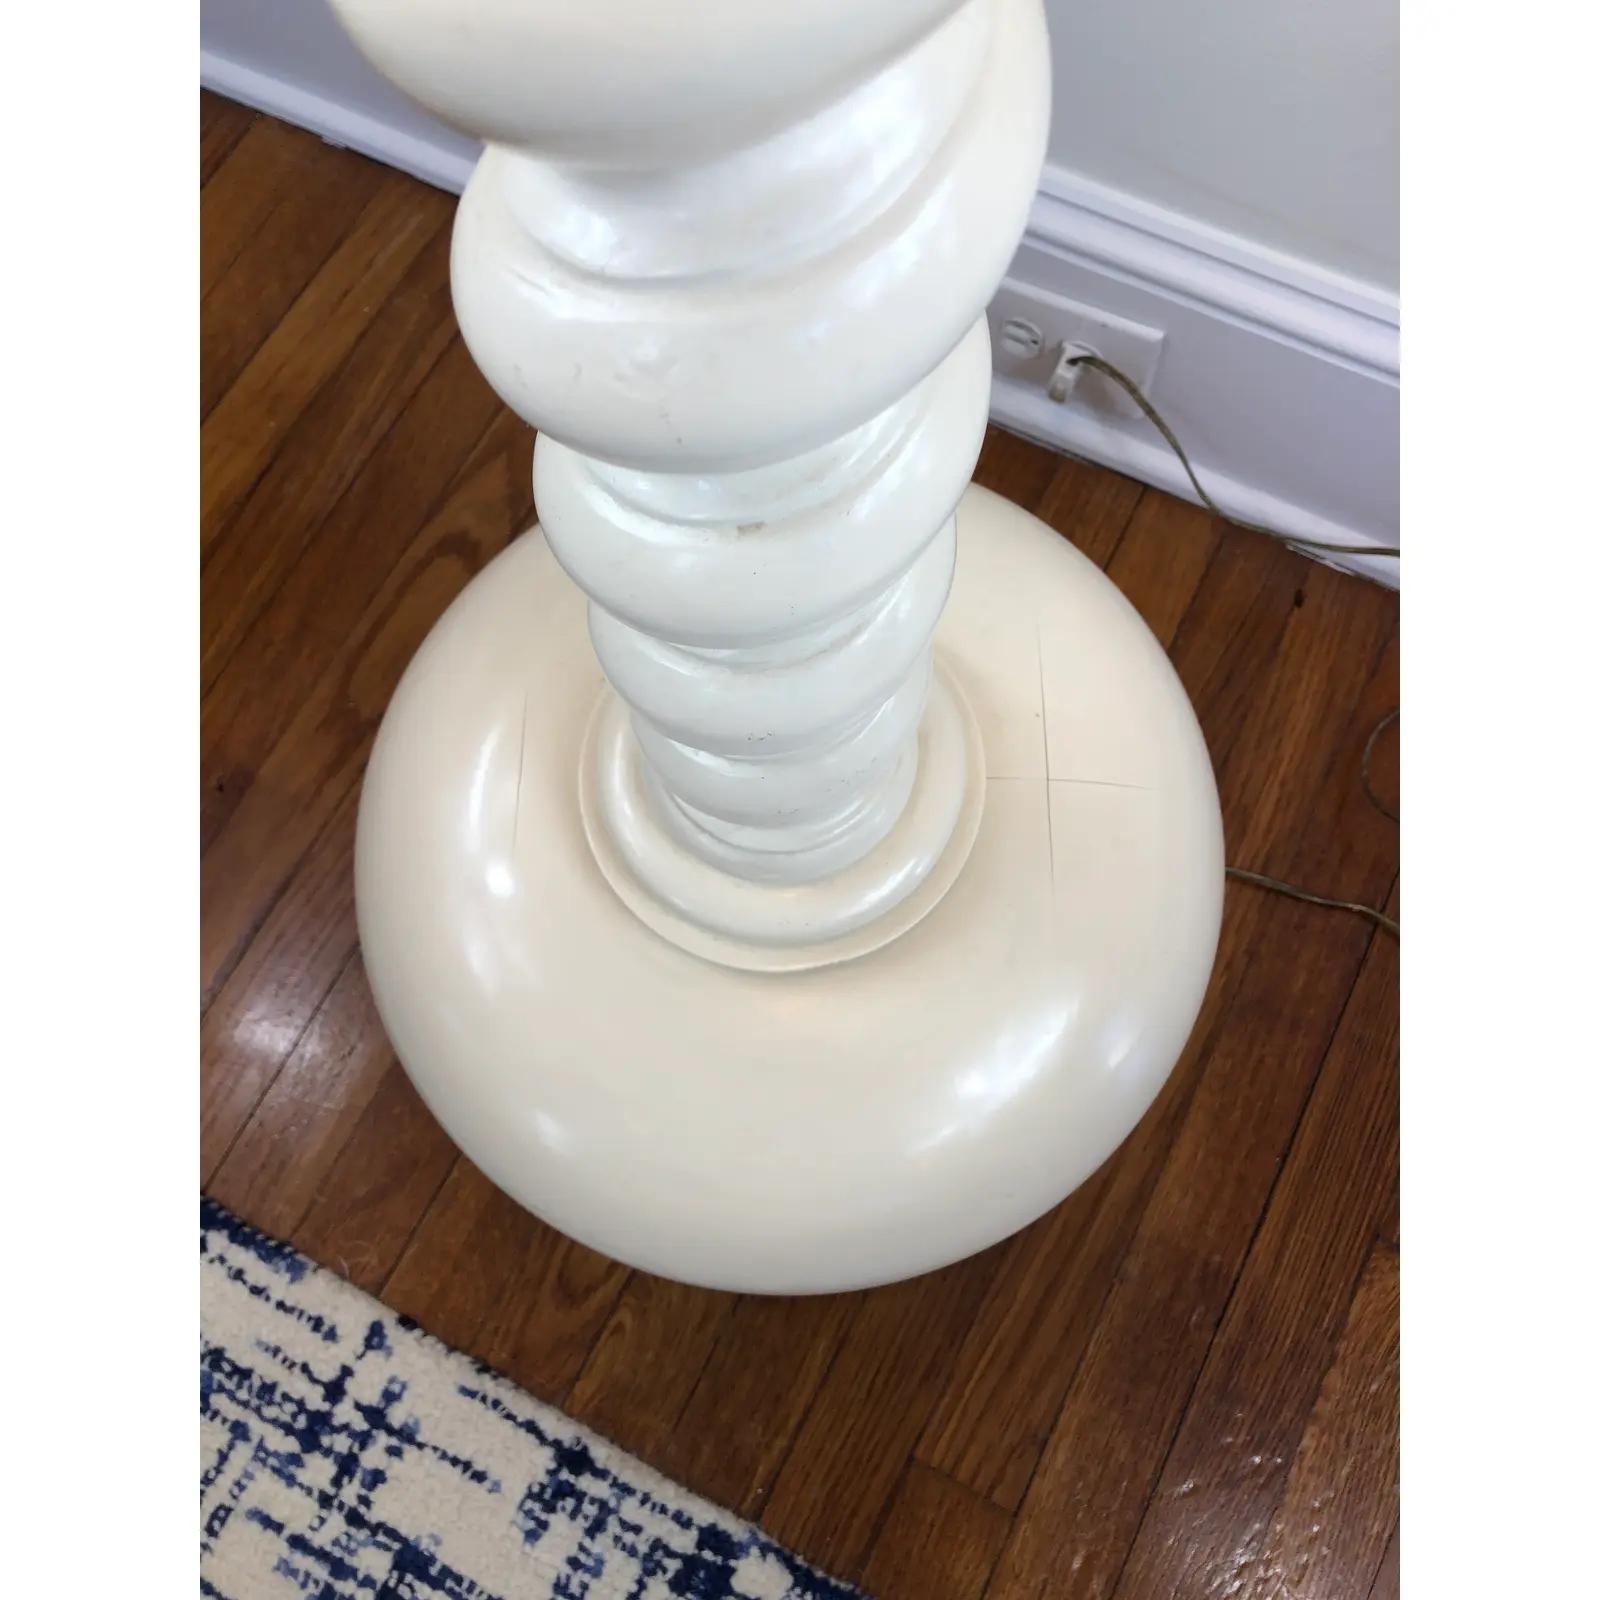 Rare Modern Twist Floor Lamp in the manner of Karl Springer. Unique with a bulbous base that separates it from the pack.
Curbside to NYC/Philly $400